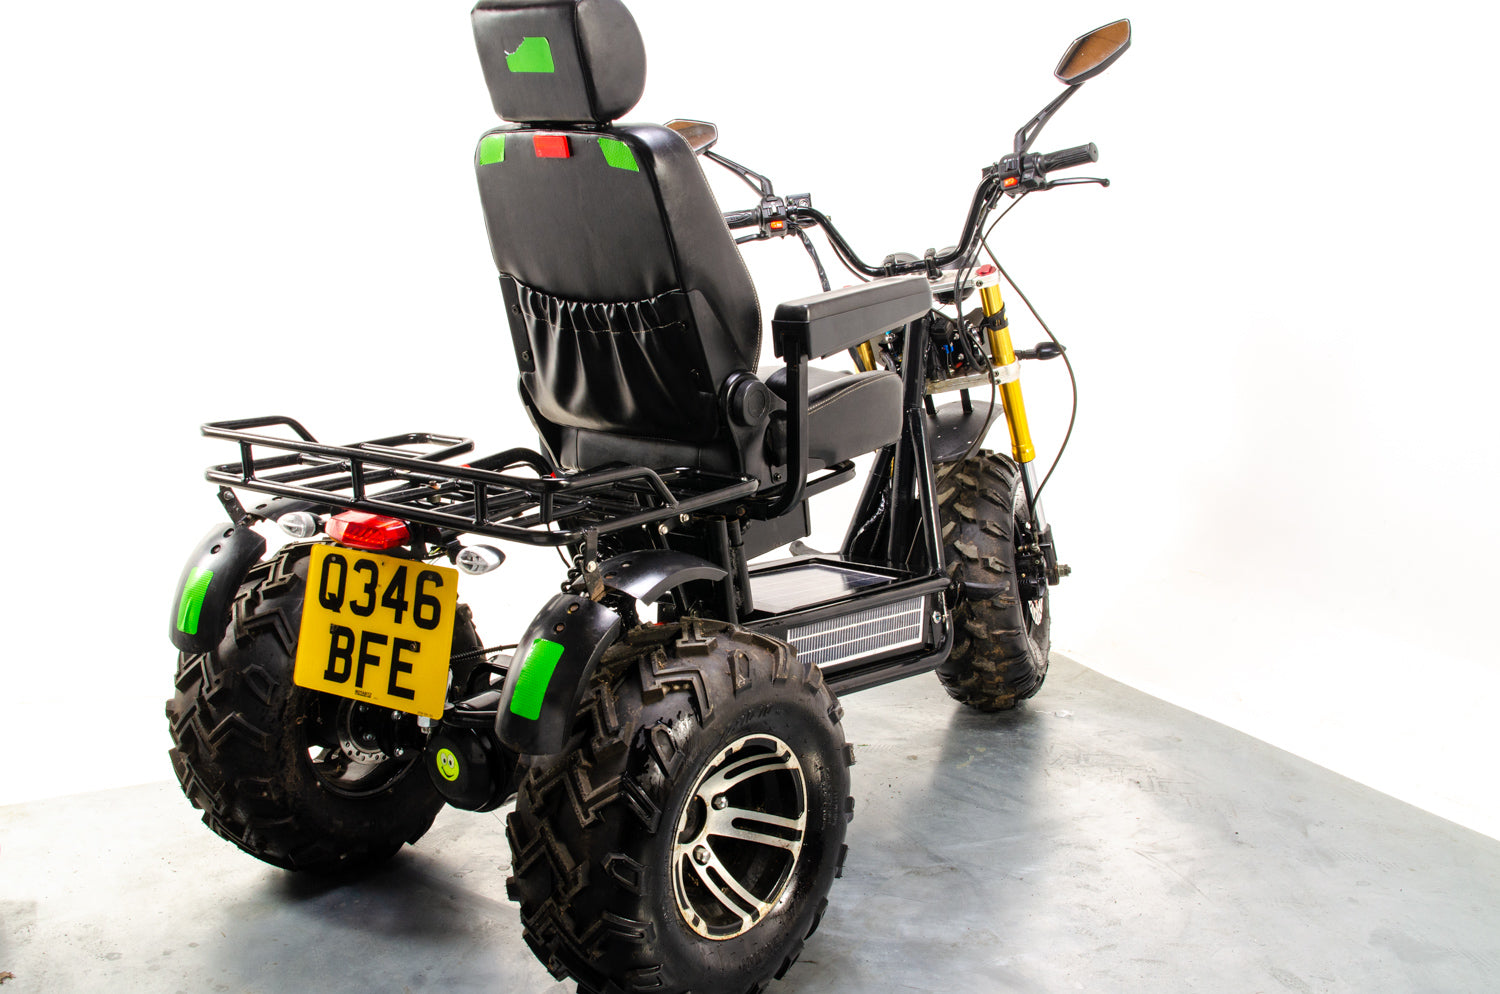 All-Terrain Off-Road Mobility Scooter Trike ATV AWD Monster Wheels Road Legal 20mph